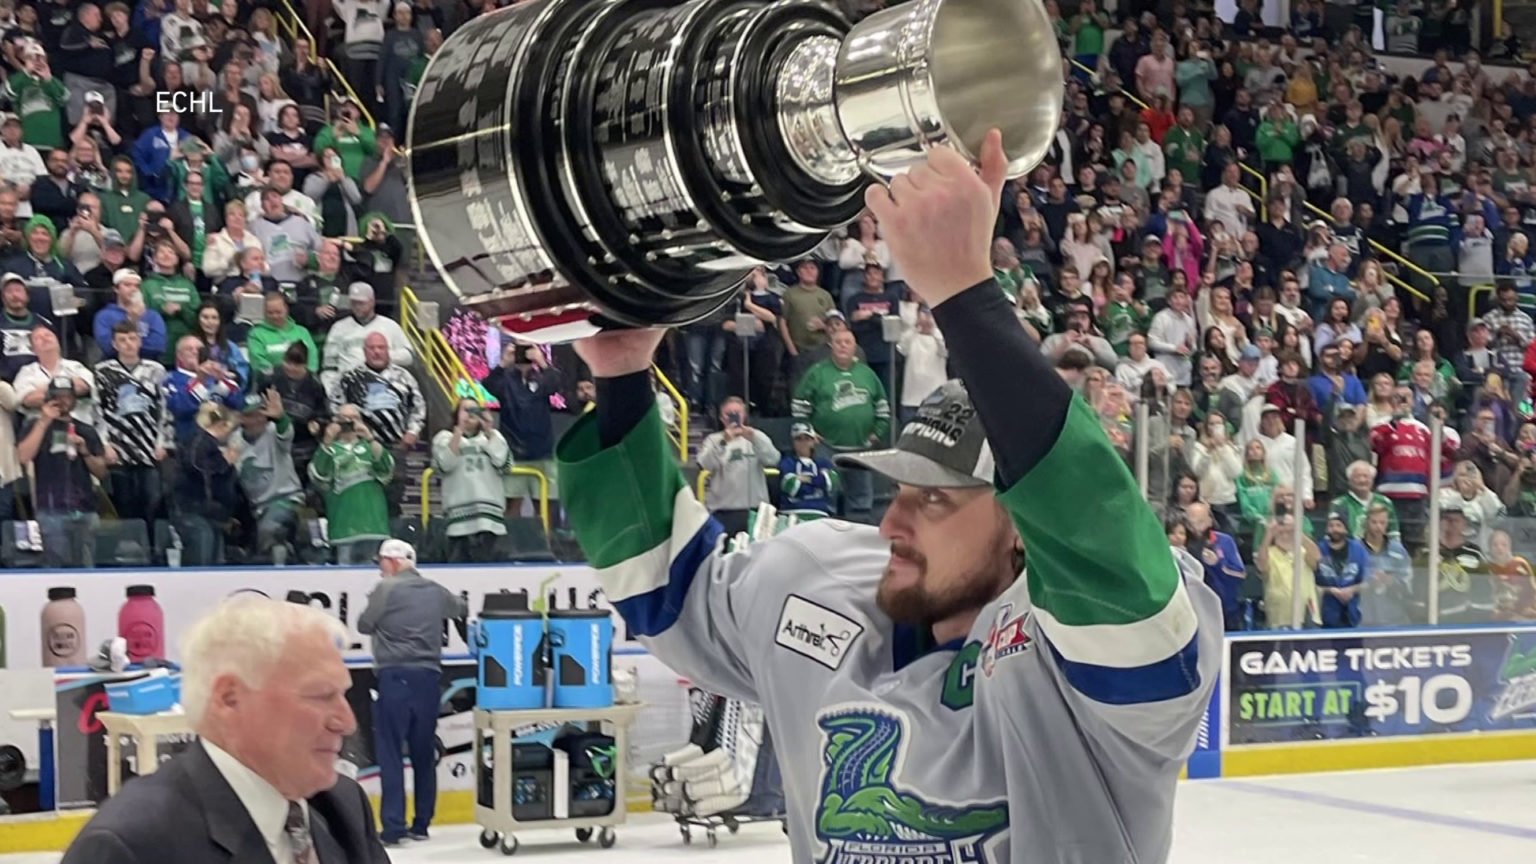 Everblades win the Kelly Cup defeating the Walleye